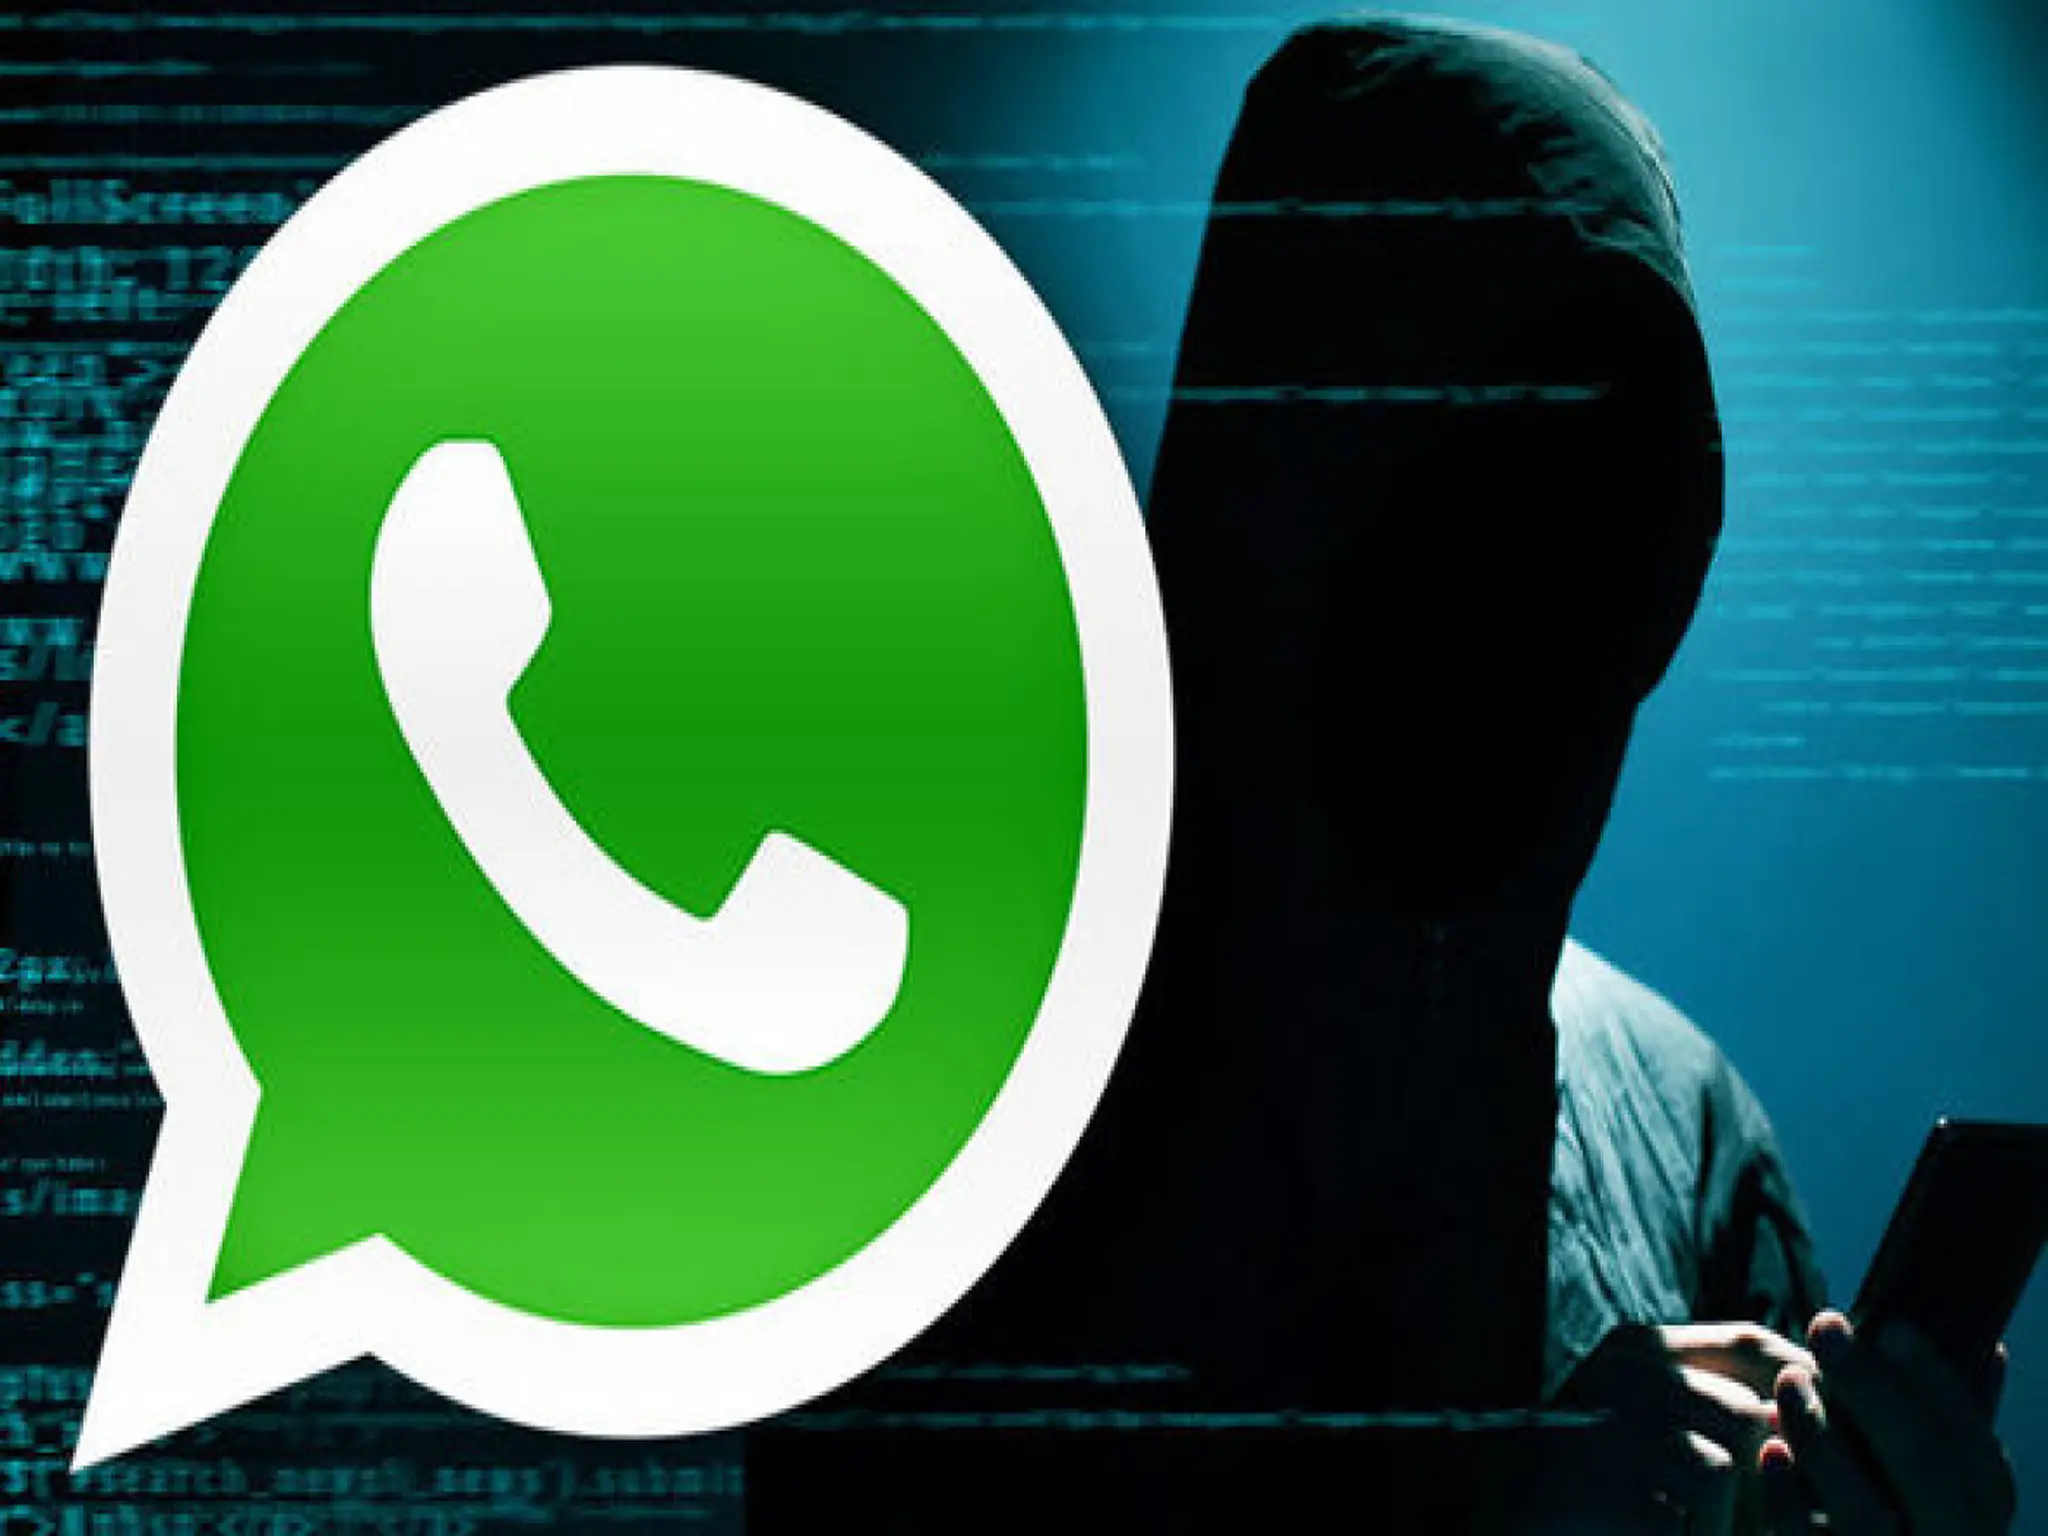 The UAE Central Bank warns users of fraudulent messages on WhatsApp